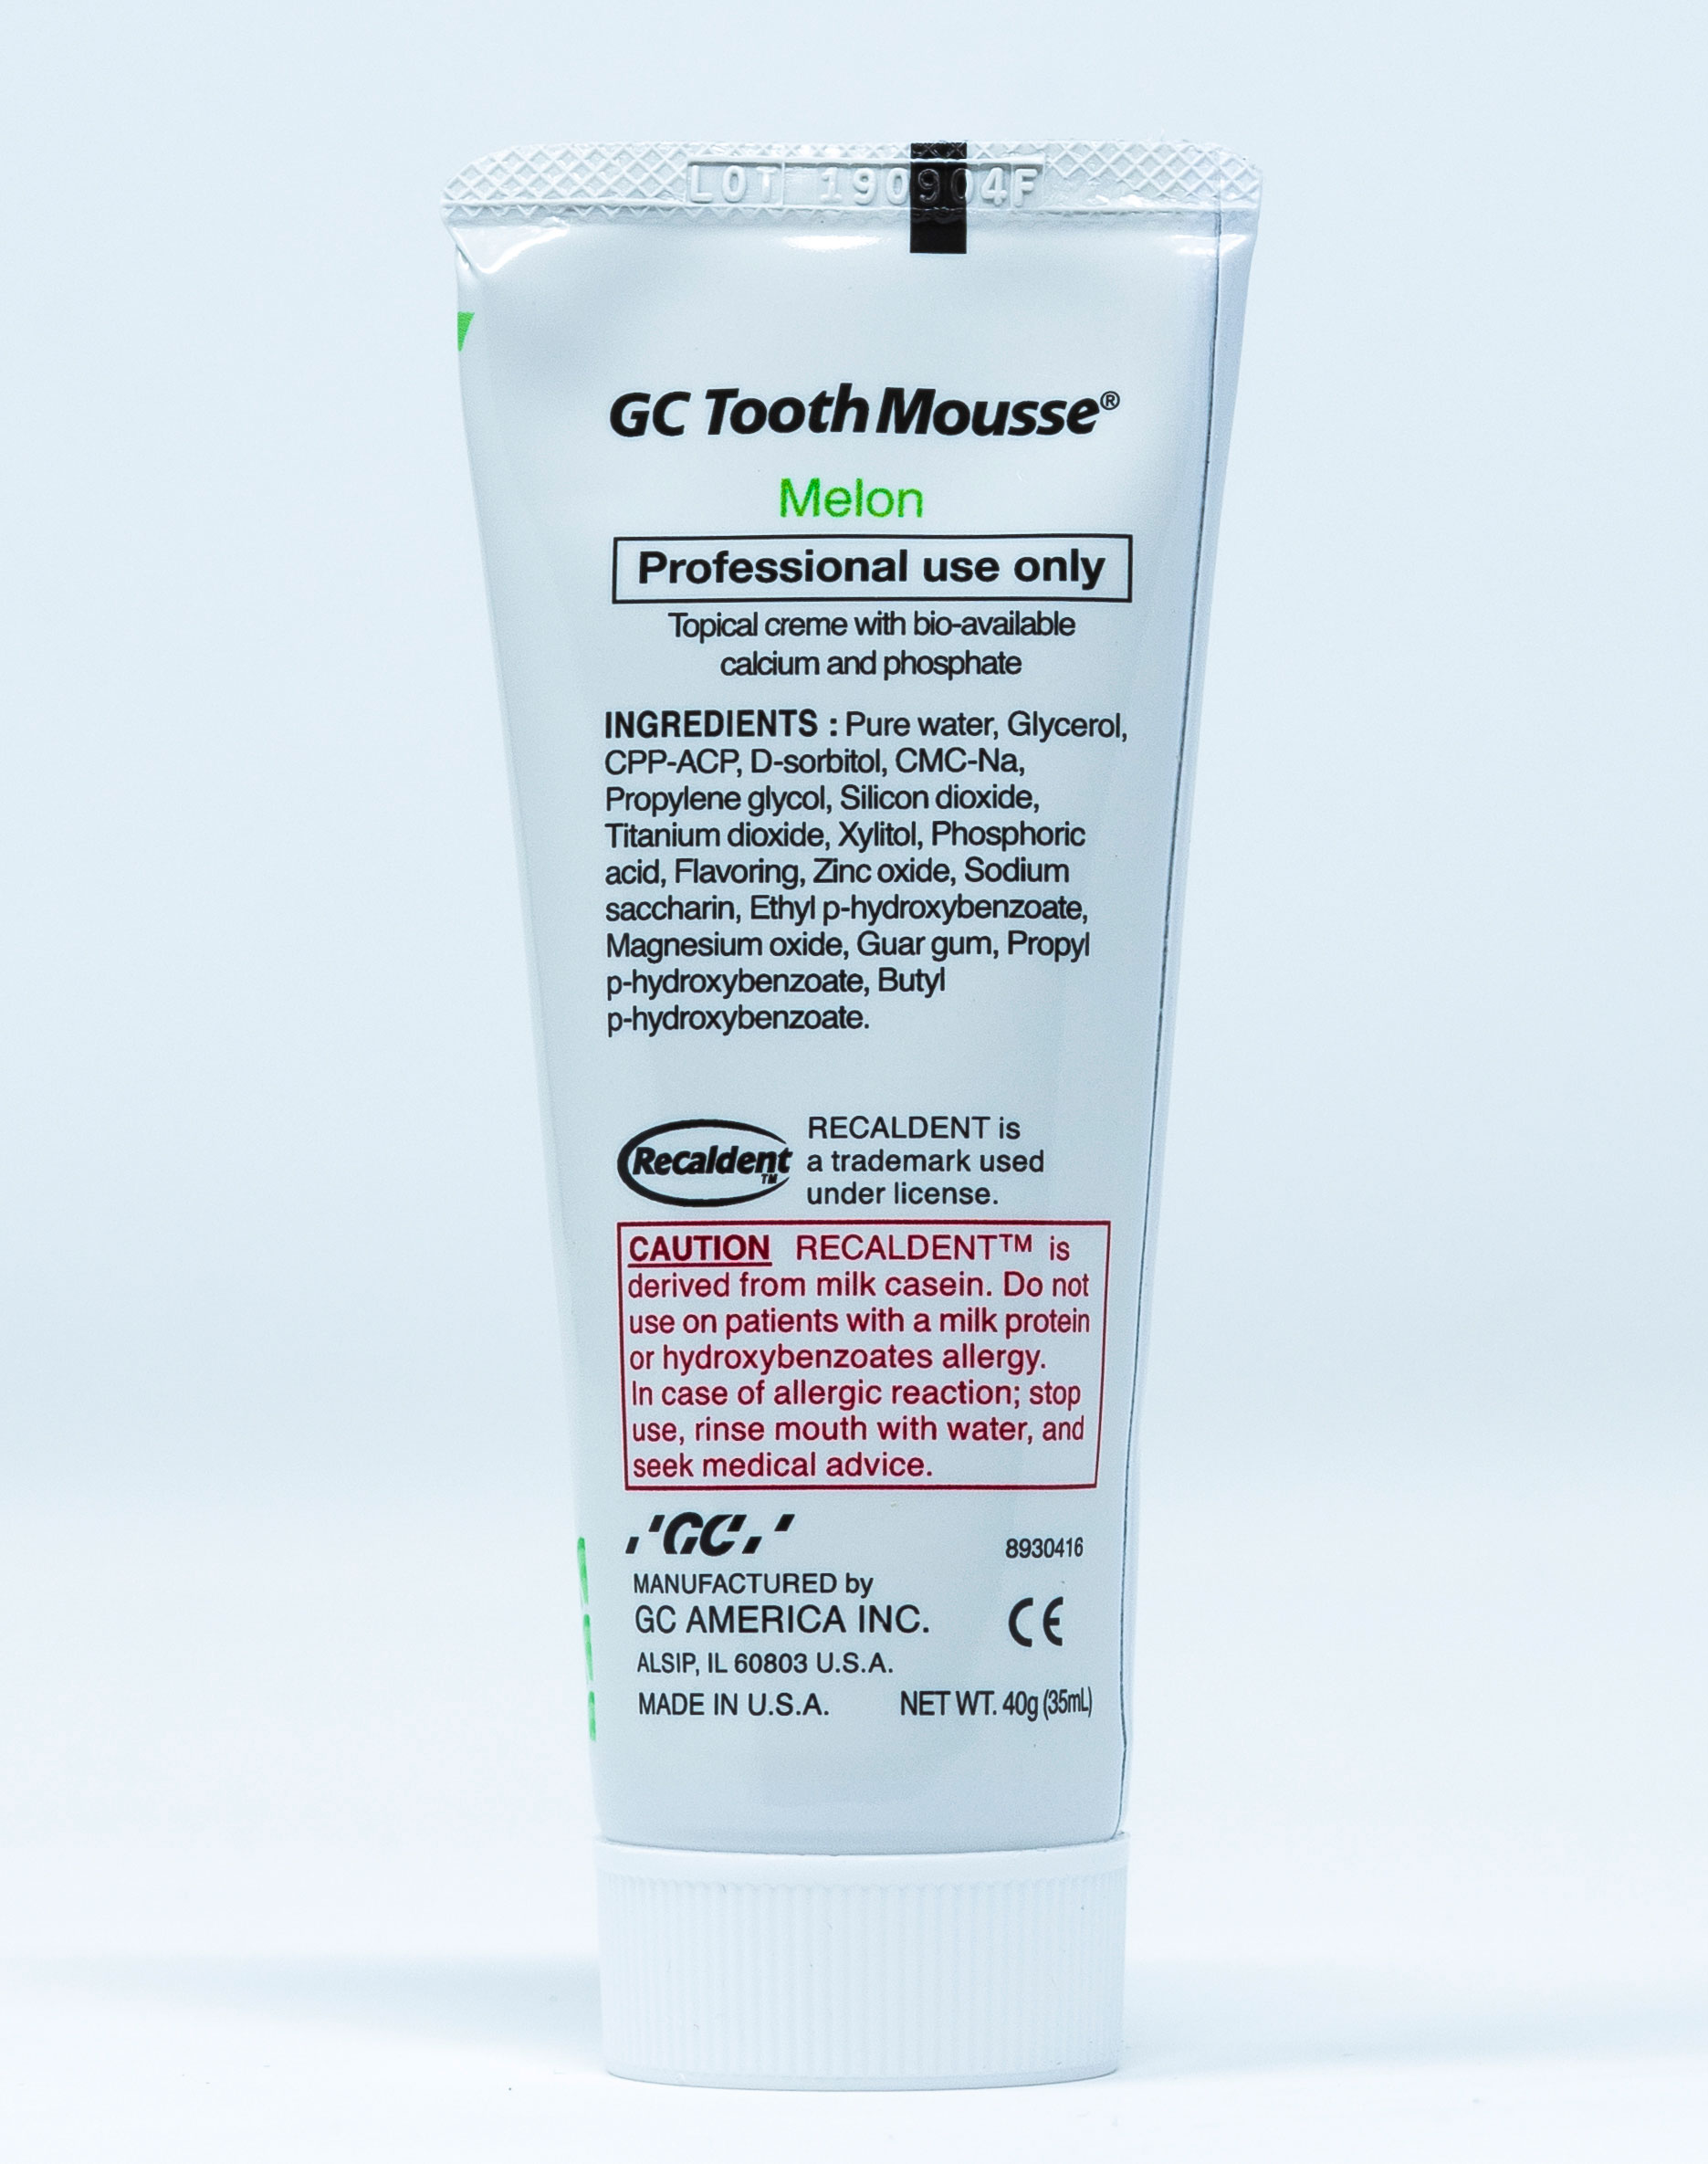 GC Crema Remineralizzante Tooth Mousse Melone - 40 g